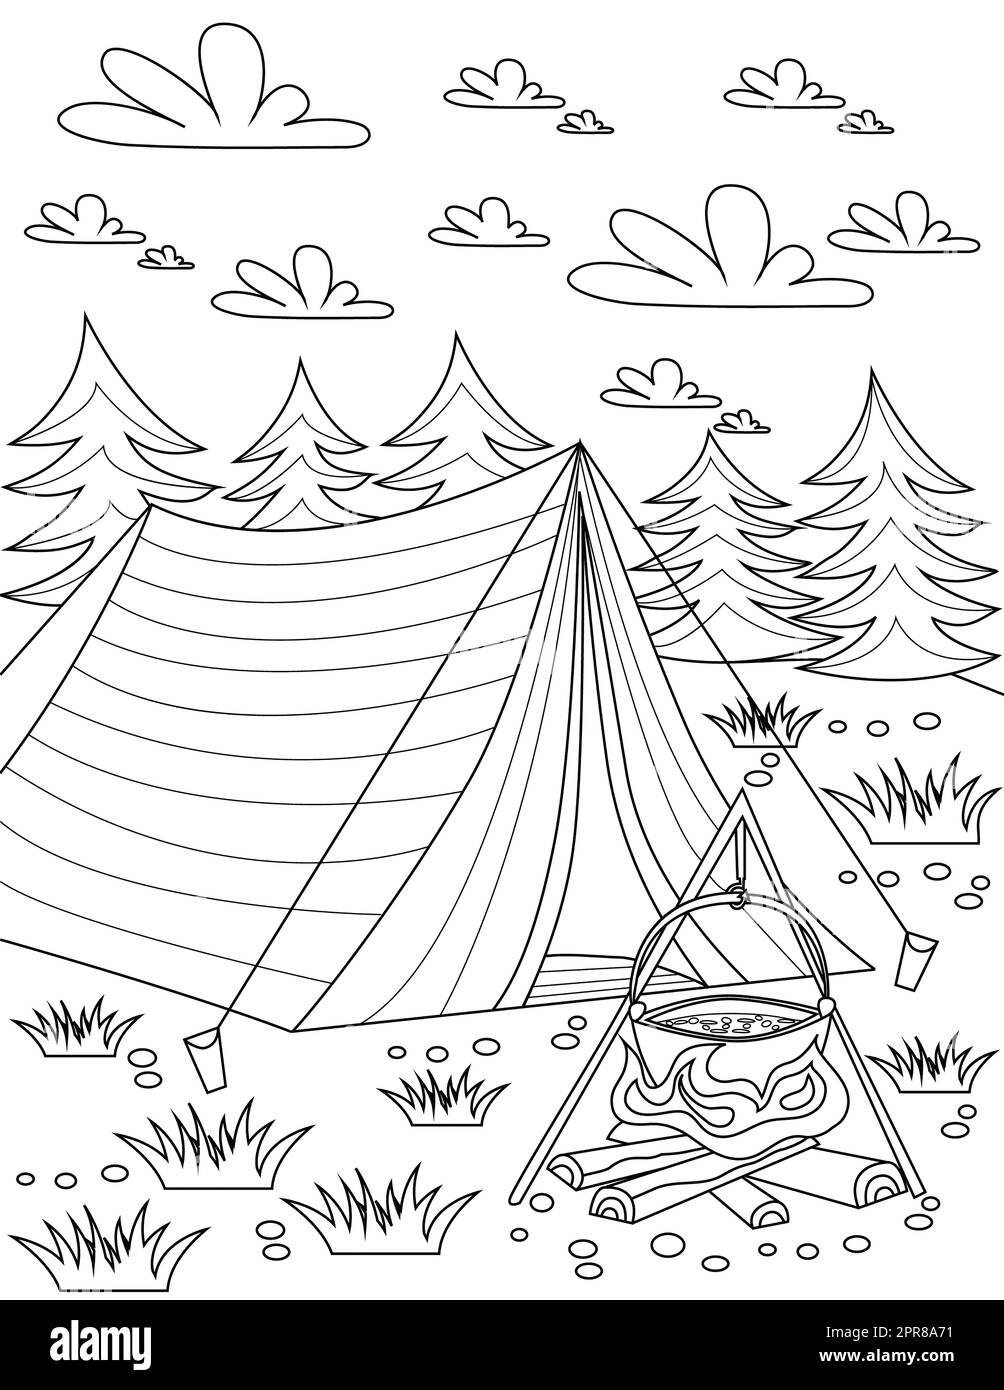 Coloring Page With Tent Placed In Nature With Opened Fire And Clouds In Sky Stock Photo